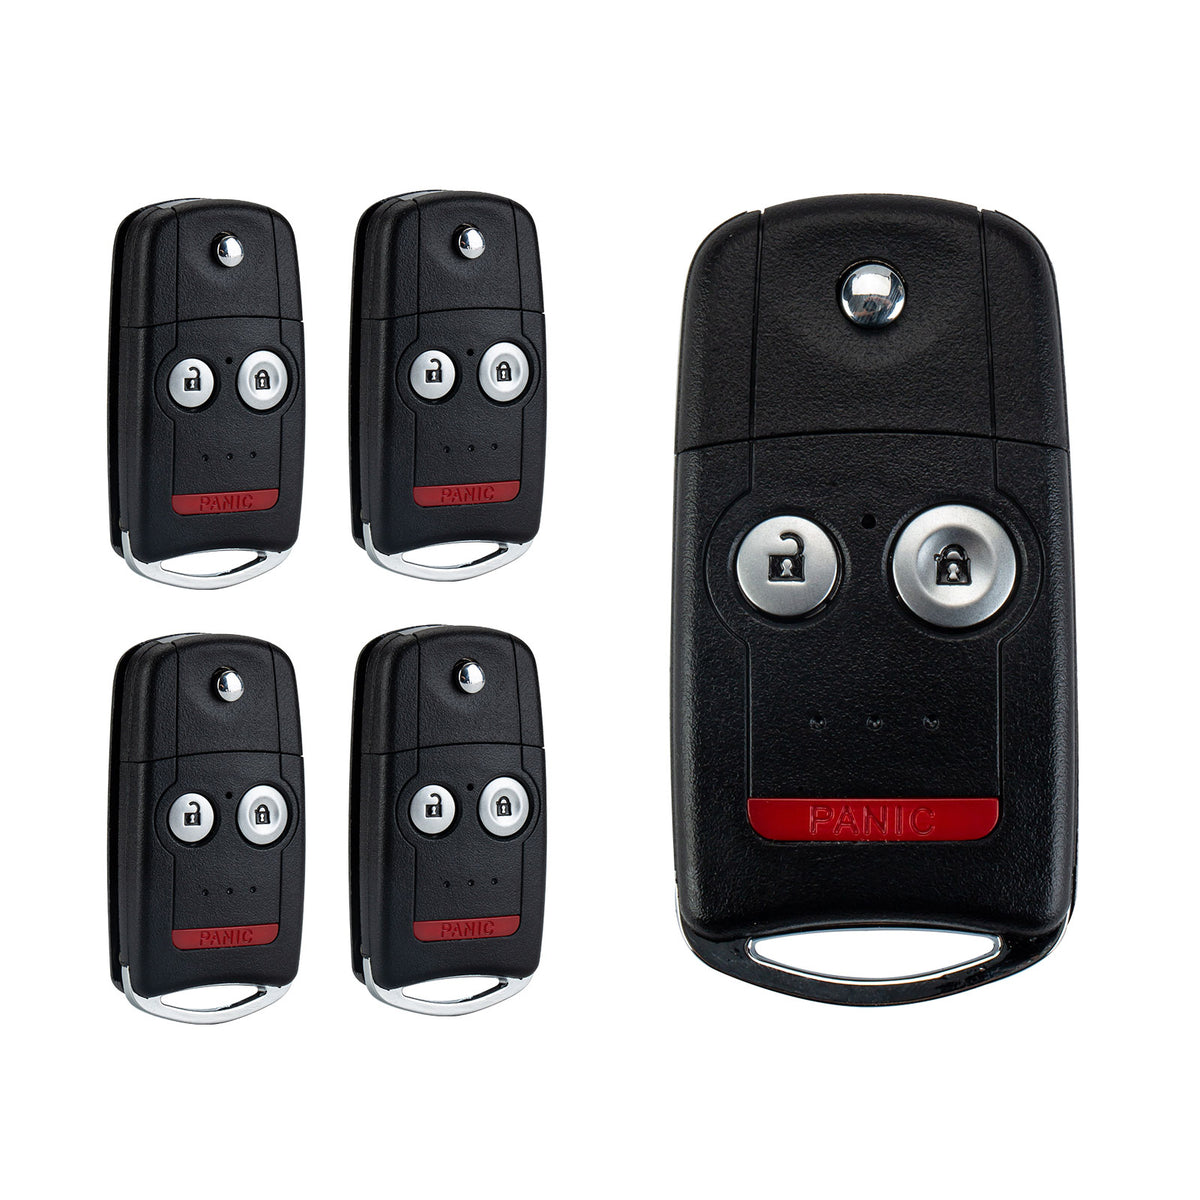 Keyless Entry Remote Flip Key Fob Replacement for Acura 2007-2013 RDX MDX 3BTN N5F0602A1A  KR-A3SA